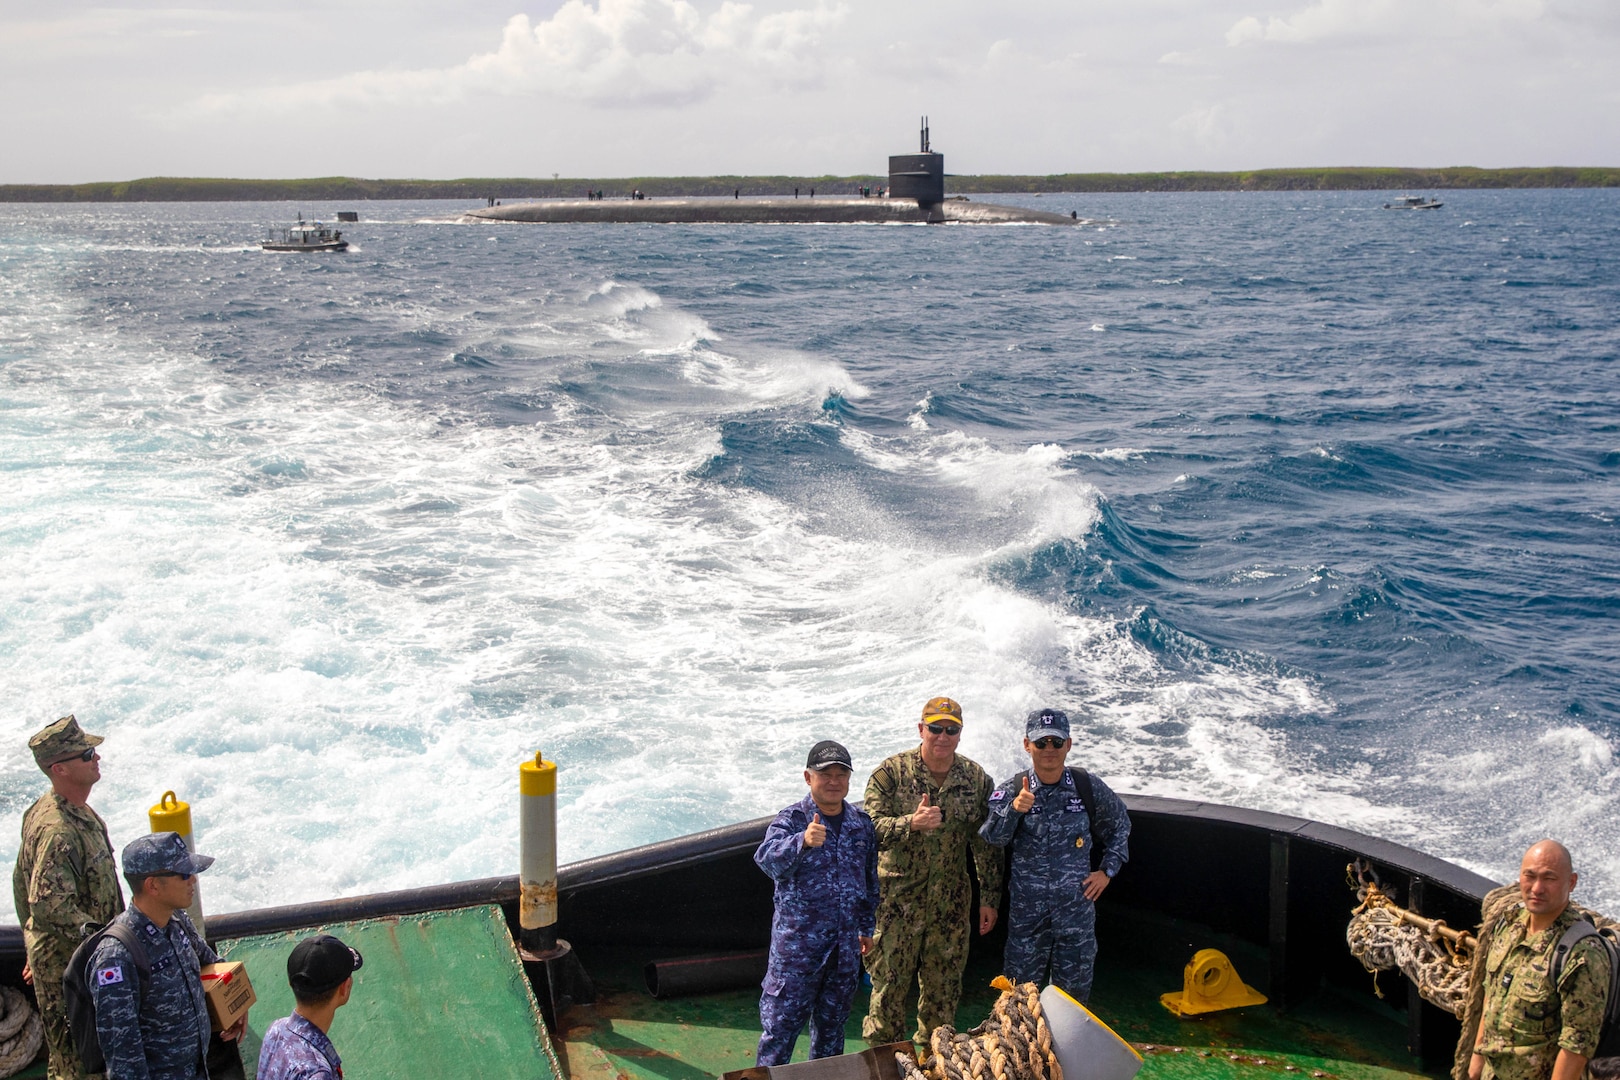 From left, Japan Maritime Self-Defense Force (JMSDF) Vice Adm. Tateki Tawara, commander, Fleet Submarine Force; U.S. Navy Rear Adm. Rick Seif, commander, Submarine Group 7; and Republic of Korea (ROK) Navy Rear Adm. Su Youl Lee, commander, ROK Navy Submarine Force; pose for a photo aboard a tug boat as they approach the Ohio-class ballistic missile submarine USS Maine (SSBN 741), April 18.